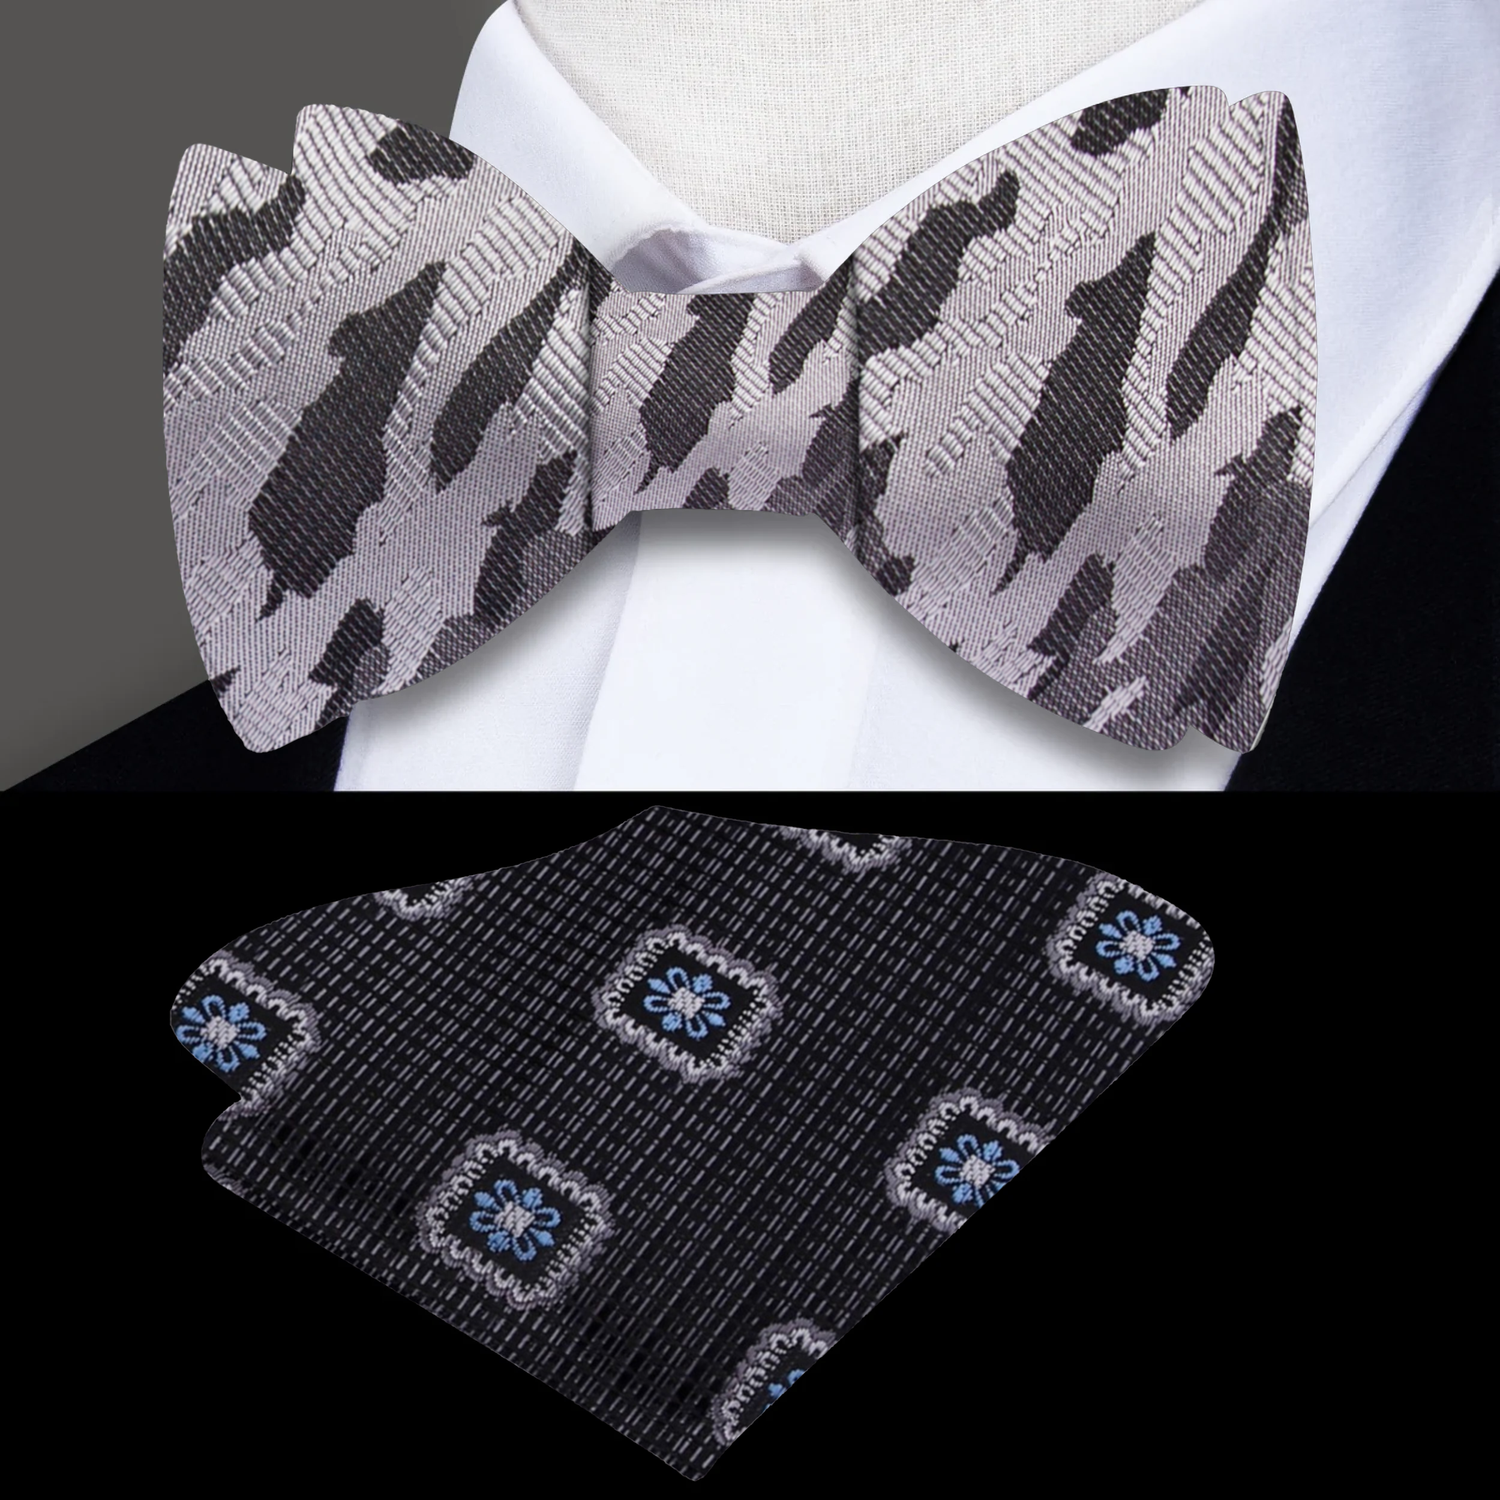 Shades of Grey and Black Camouflage Bow Tie and Accenting Black, Grey and Blue Bursts Square